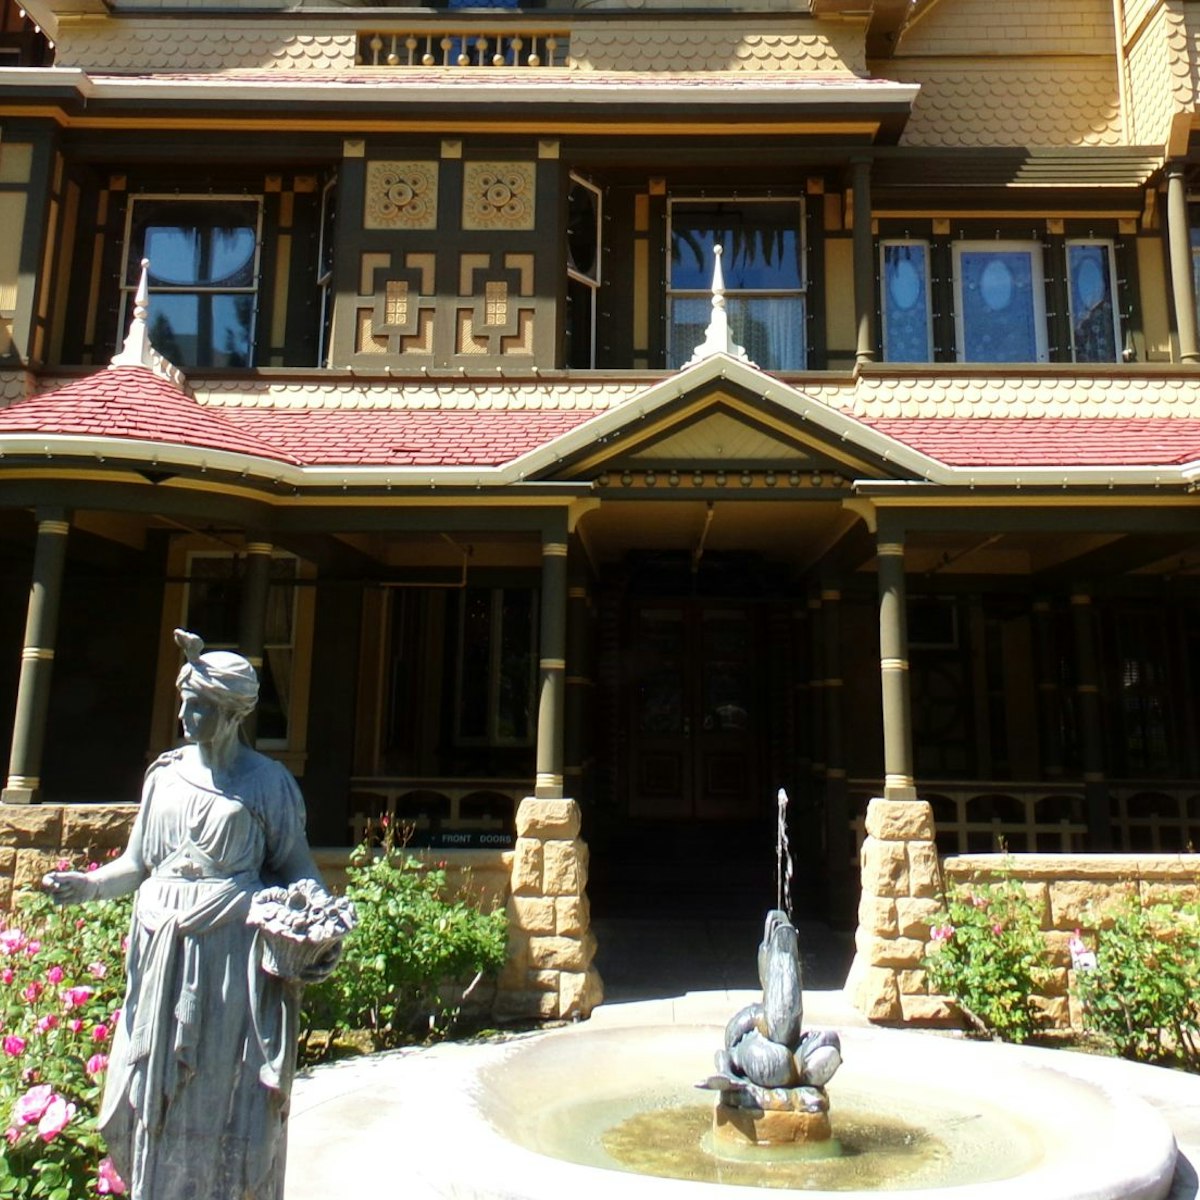 April 2, 2016: Exterior of the Winchester Mystery House with statues and a fountain.